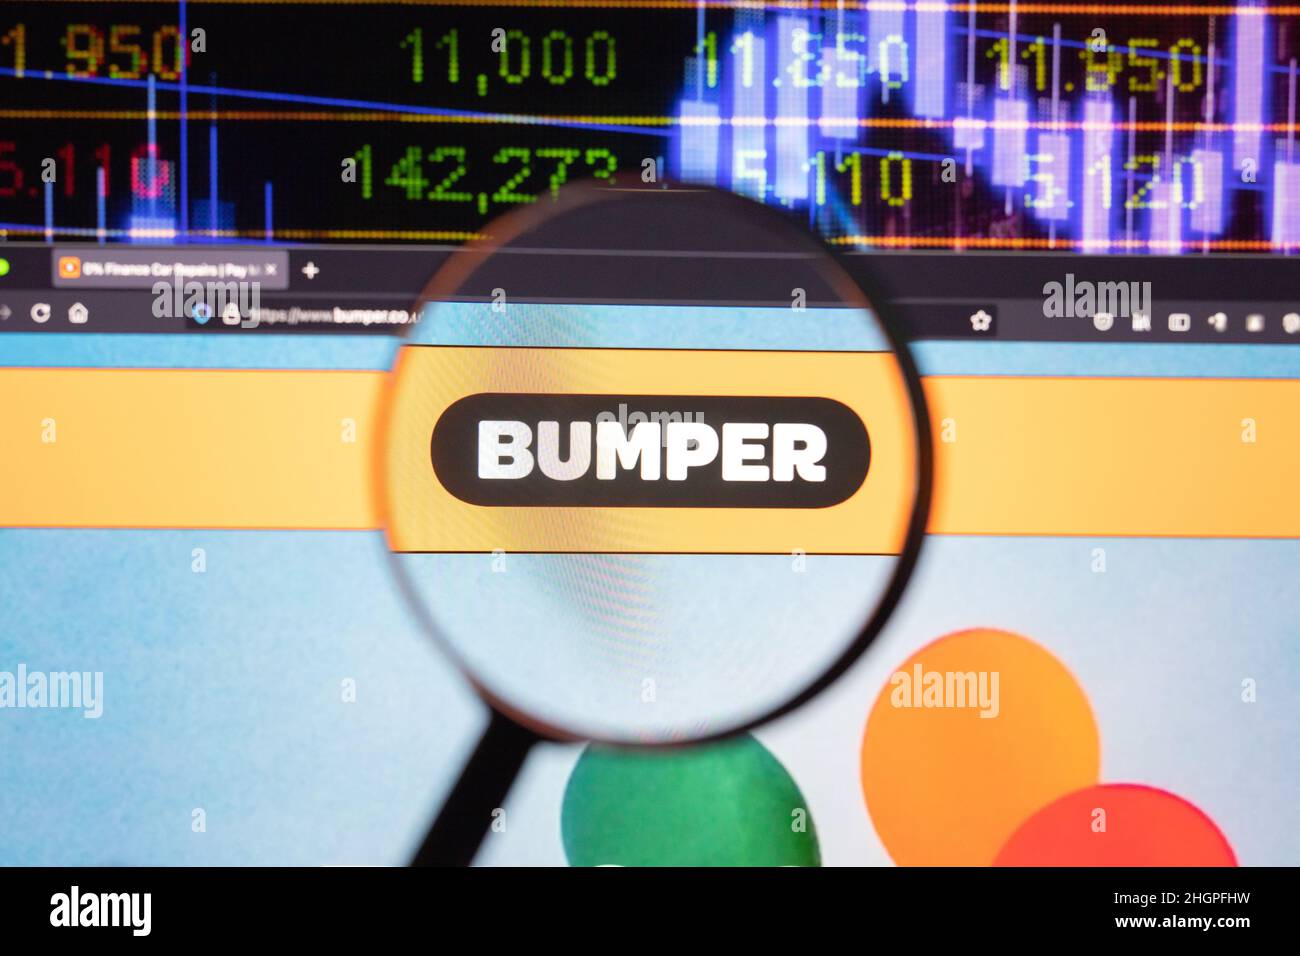 Bumper company logo on a website with blurry stock market developments in the background, seen on a computer screen through a magnifying glass. Stock Photo